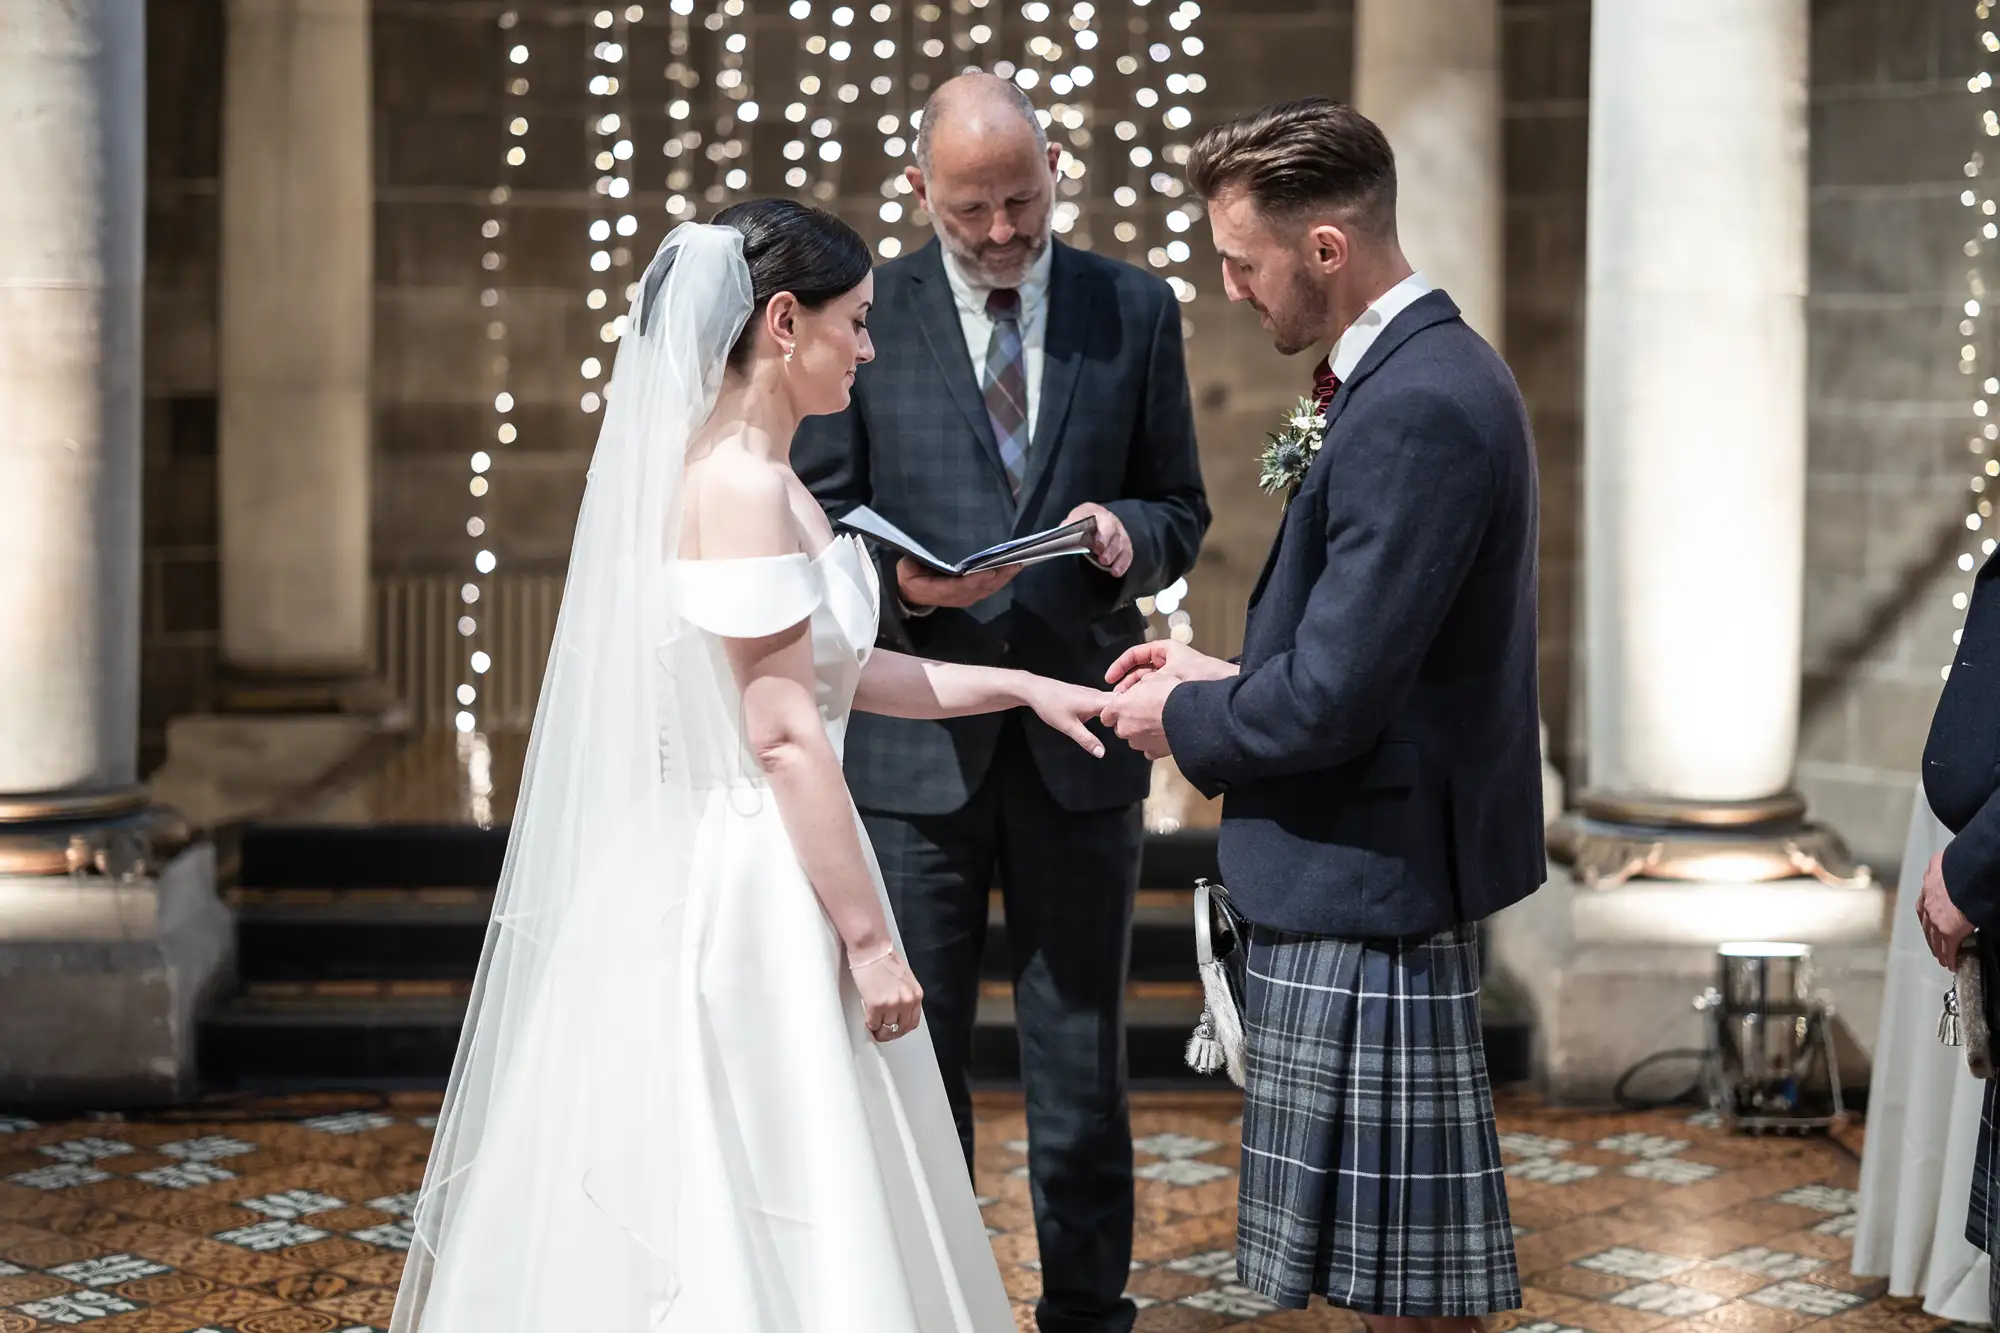 A bride in a white dress and a groom in a kilt hold hands during their wedding ceremony, with an officiant reading from a book in a church lit by string lights.